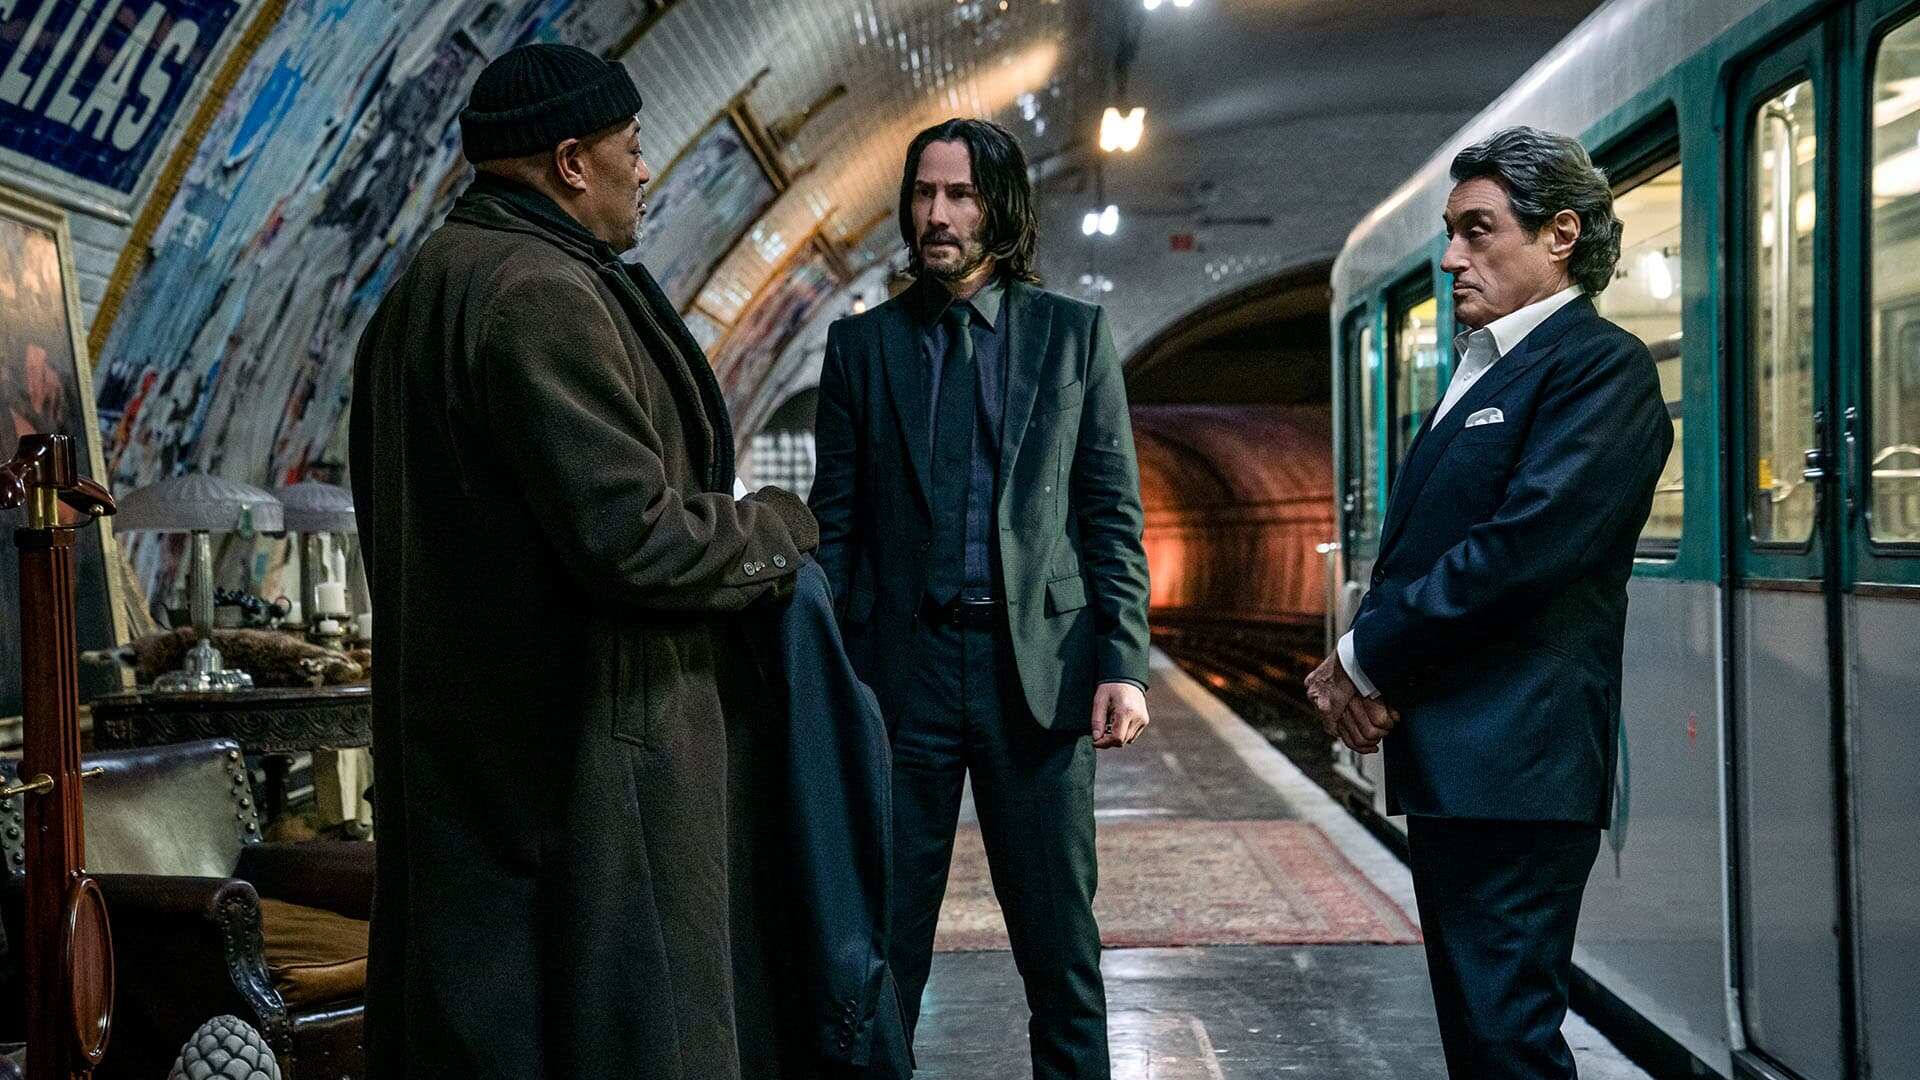 Director Chad Stahelski, Keanu Reeves Had Been Waiting 12 Years To Cast  Hiroyuki Sanada in John Wick 4: I created the role for you - FandomWire